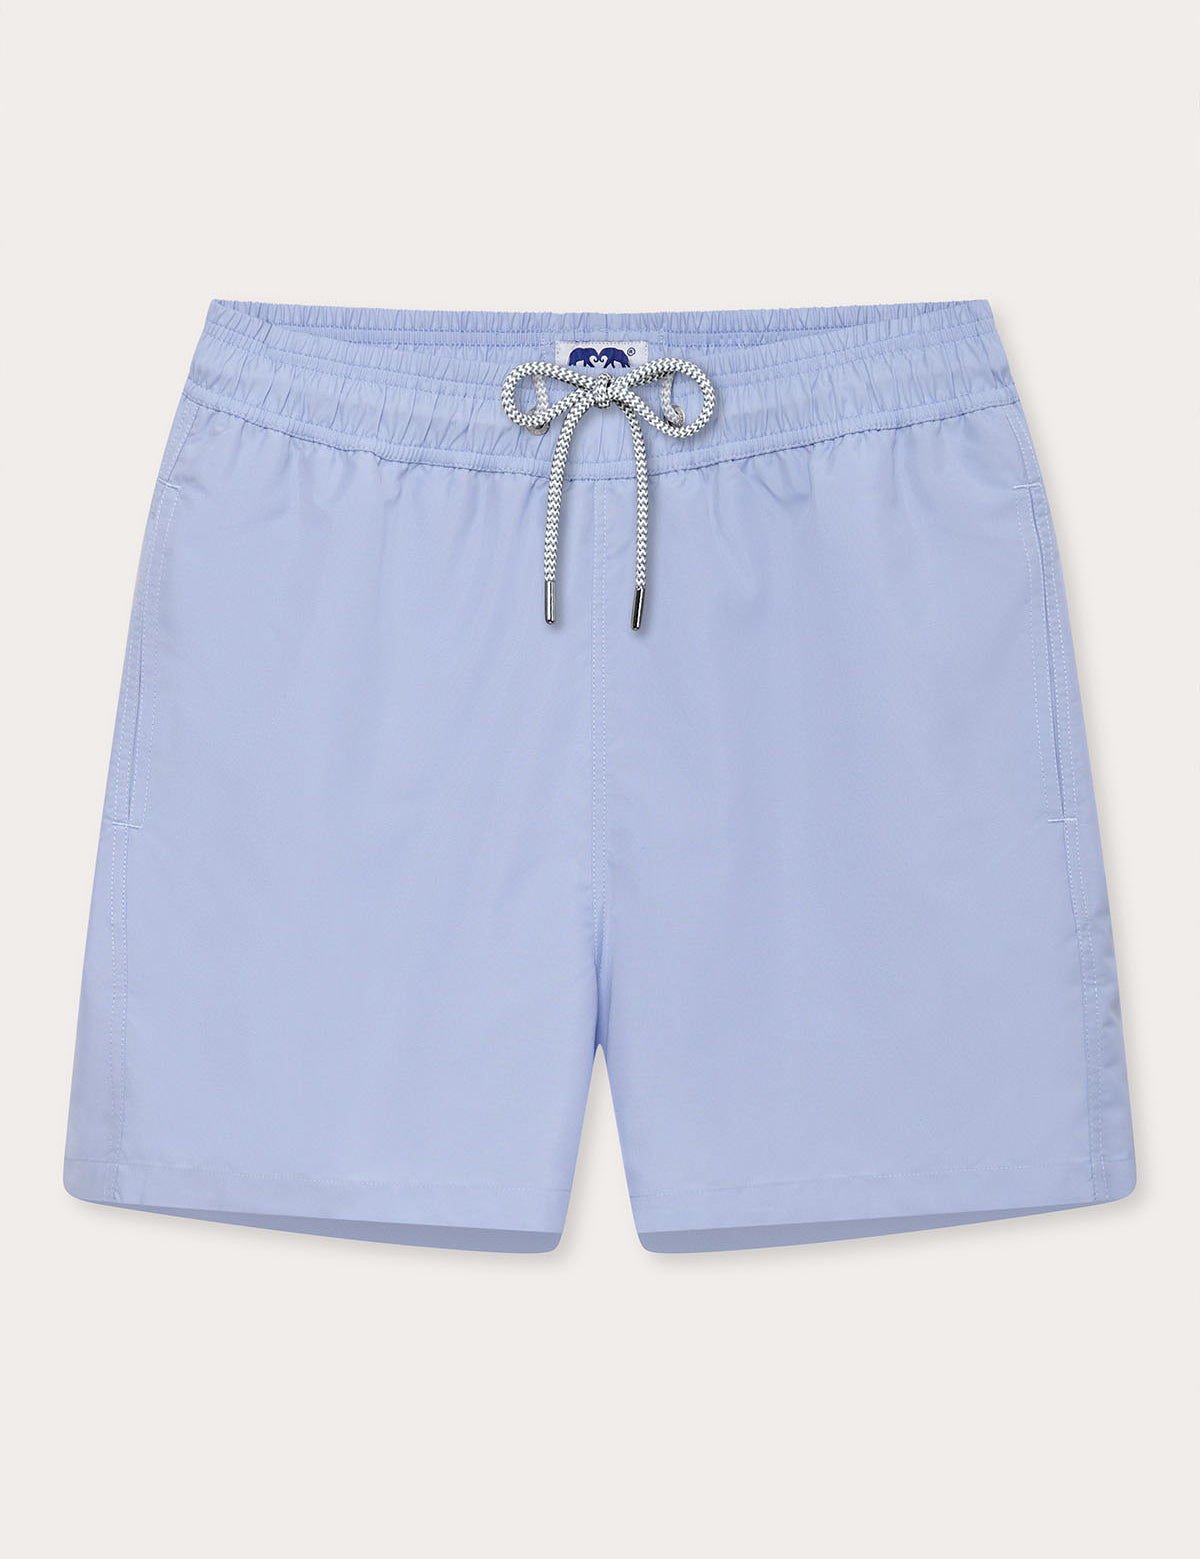 Men's Sky Blue Staniel Swim Shorts with elastic waistband and drawstring tie.